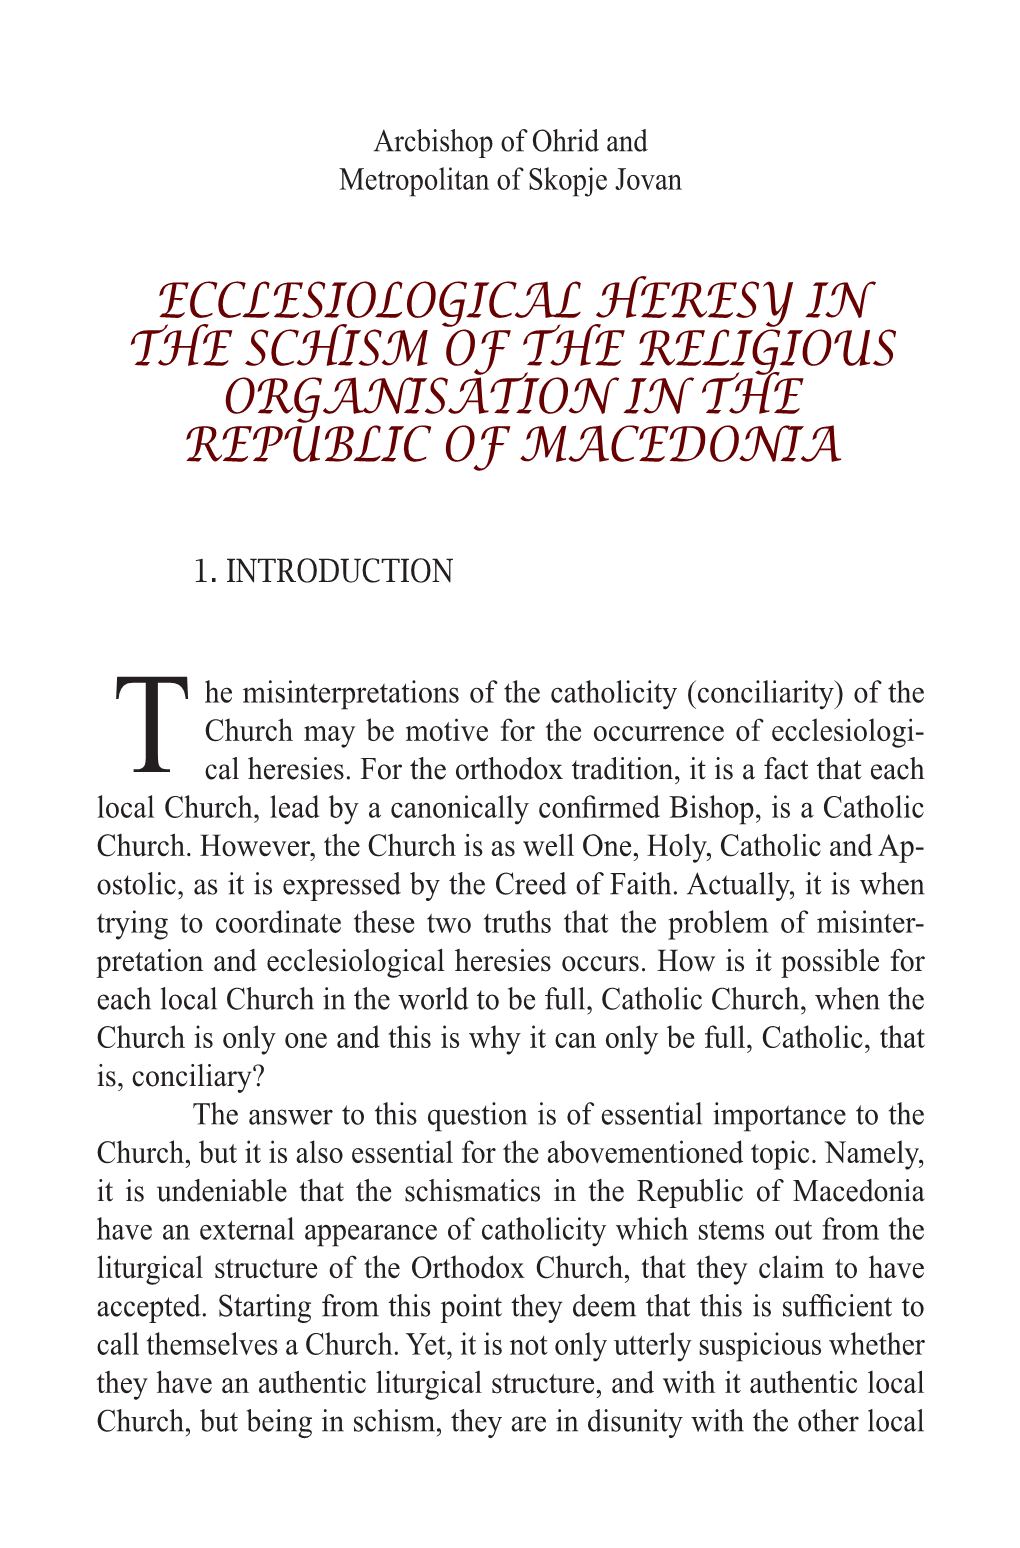 Ecclesiological Heresy in the Schism of the Religious Organisation in the Republic of Macedonia